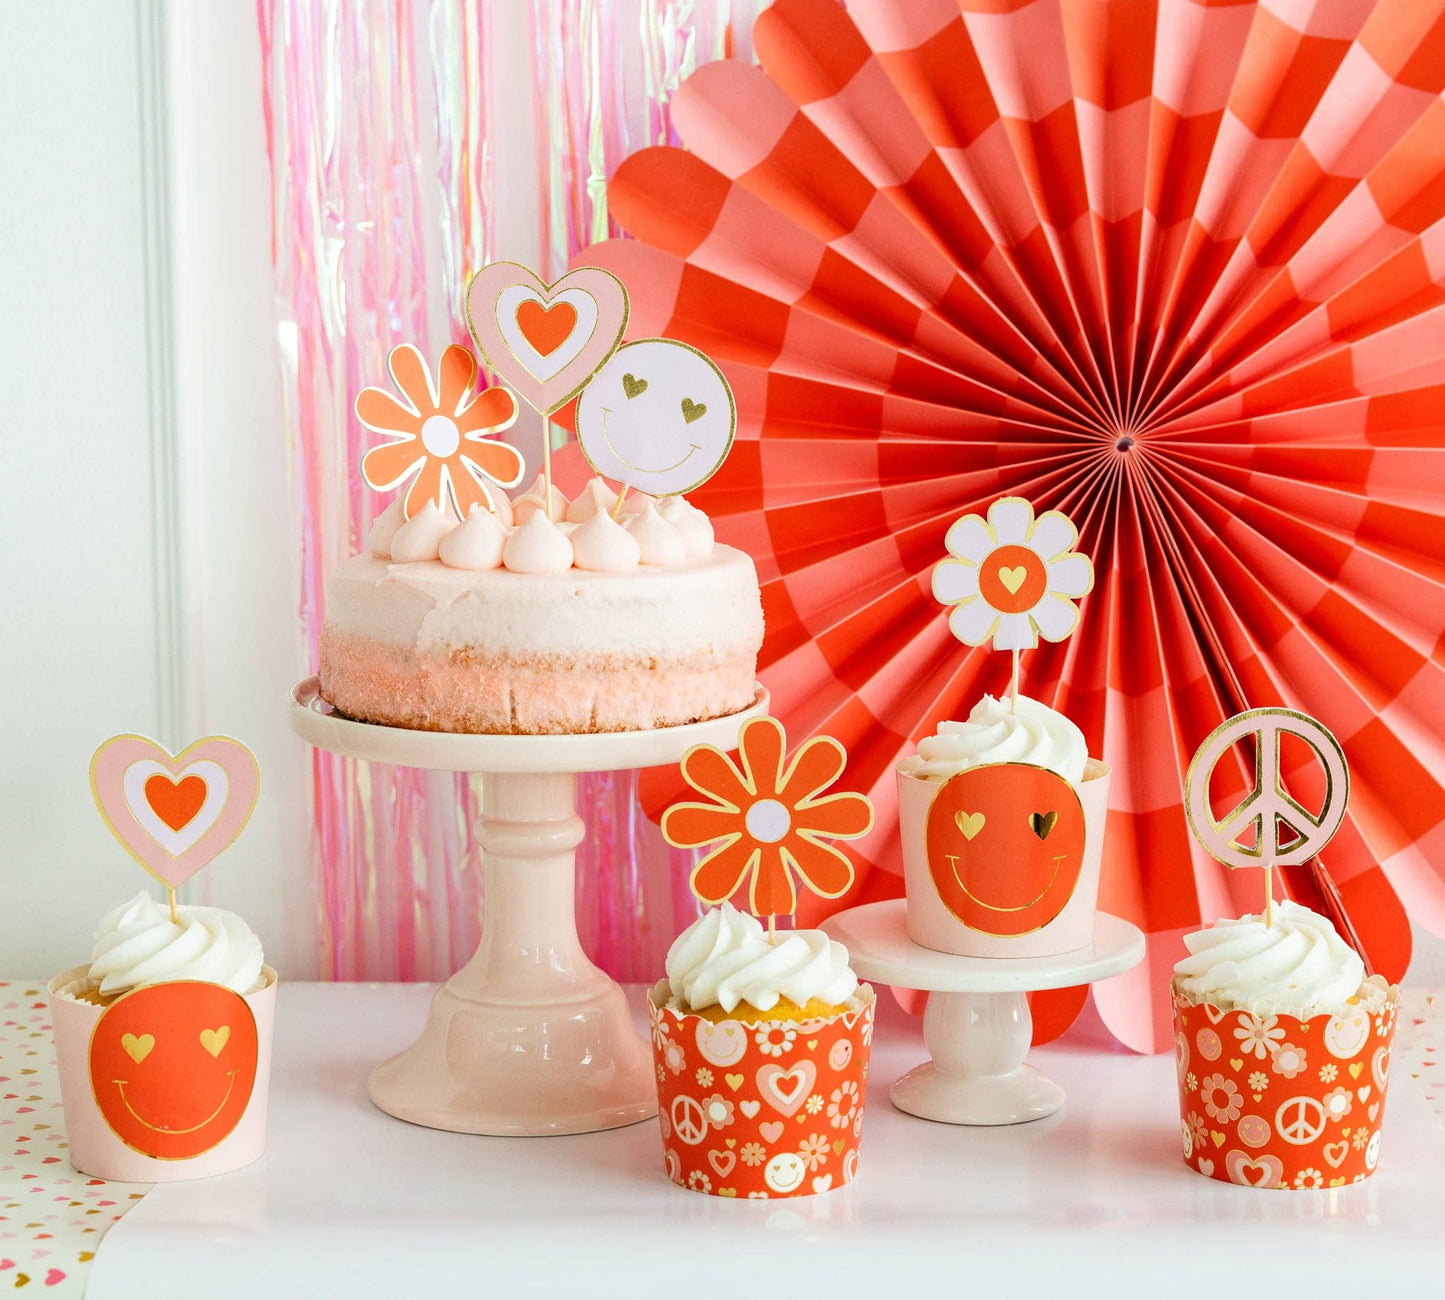 Baking Cups: Love Baking Cups with Toppers